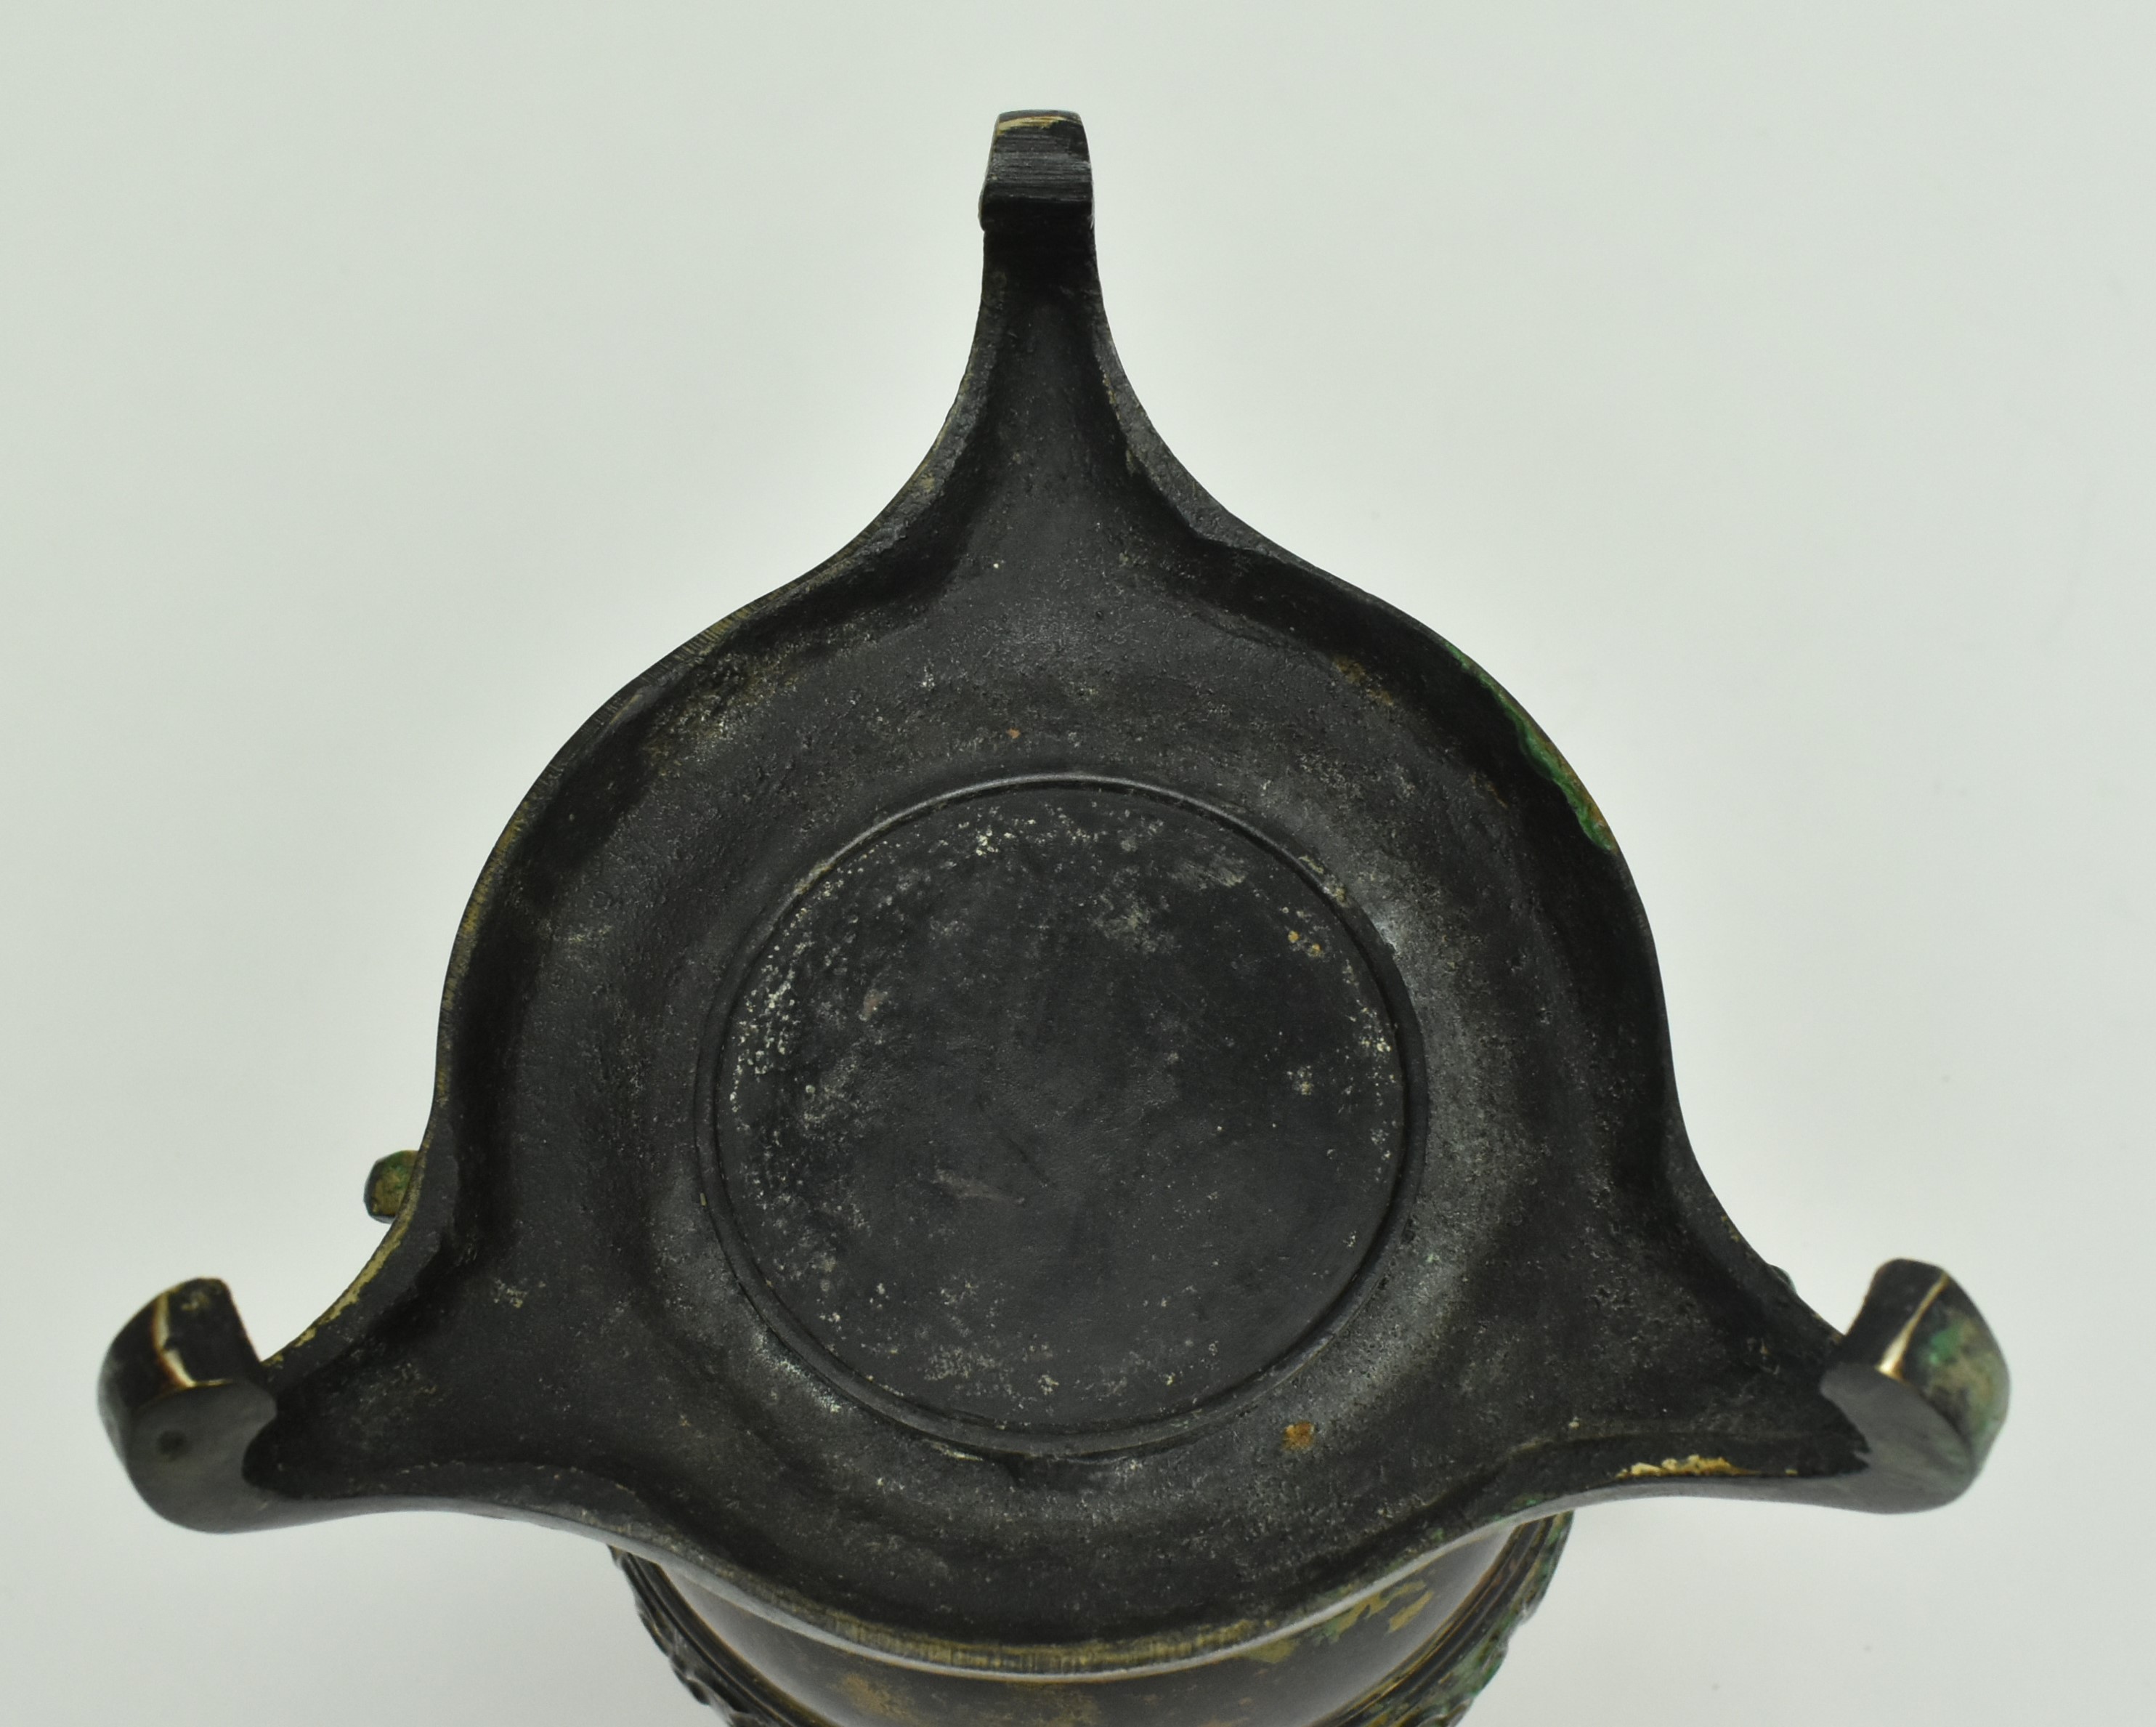 TWO JAPANESE BRONZE PIECES "DRAGON" CENSER AND PLANT POT - Image 11 of 12